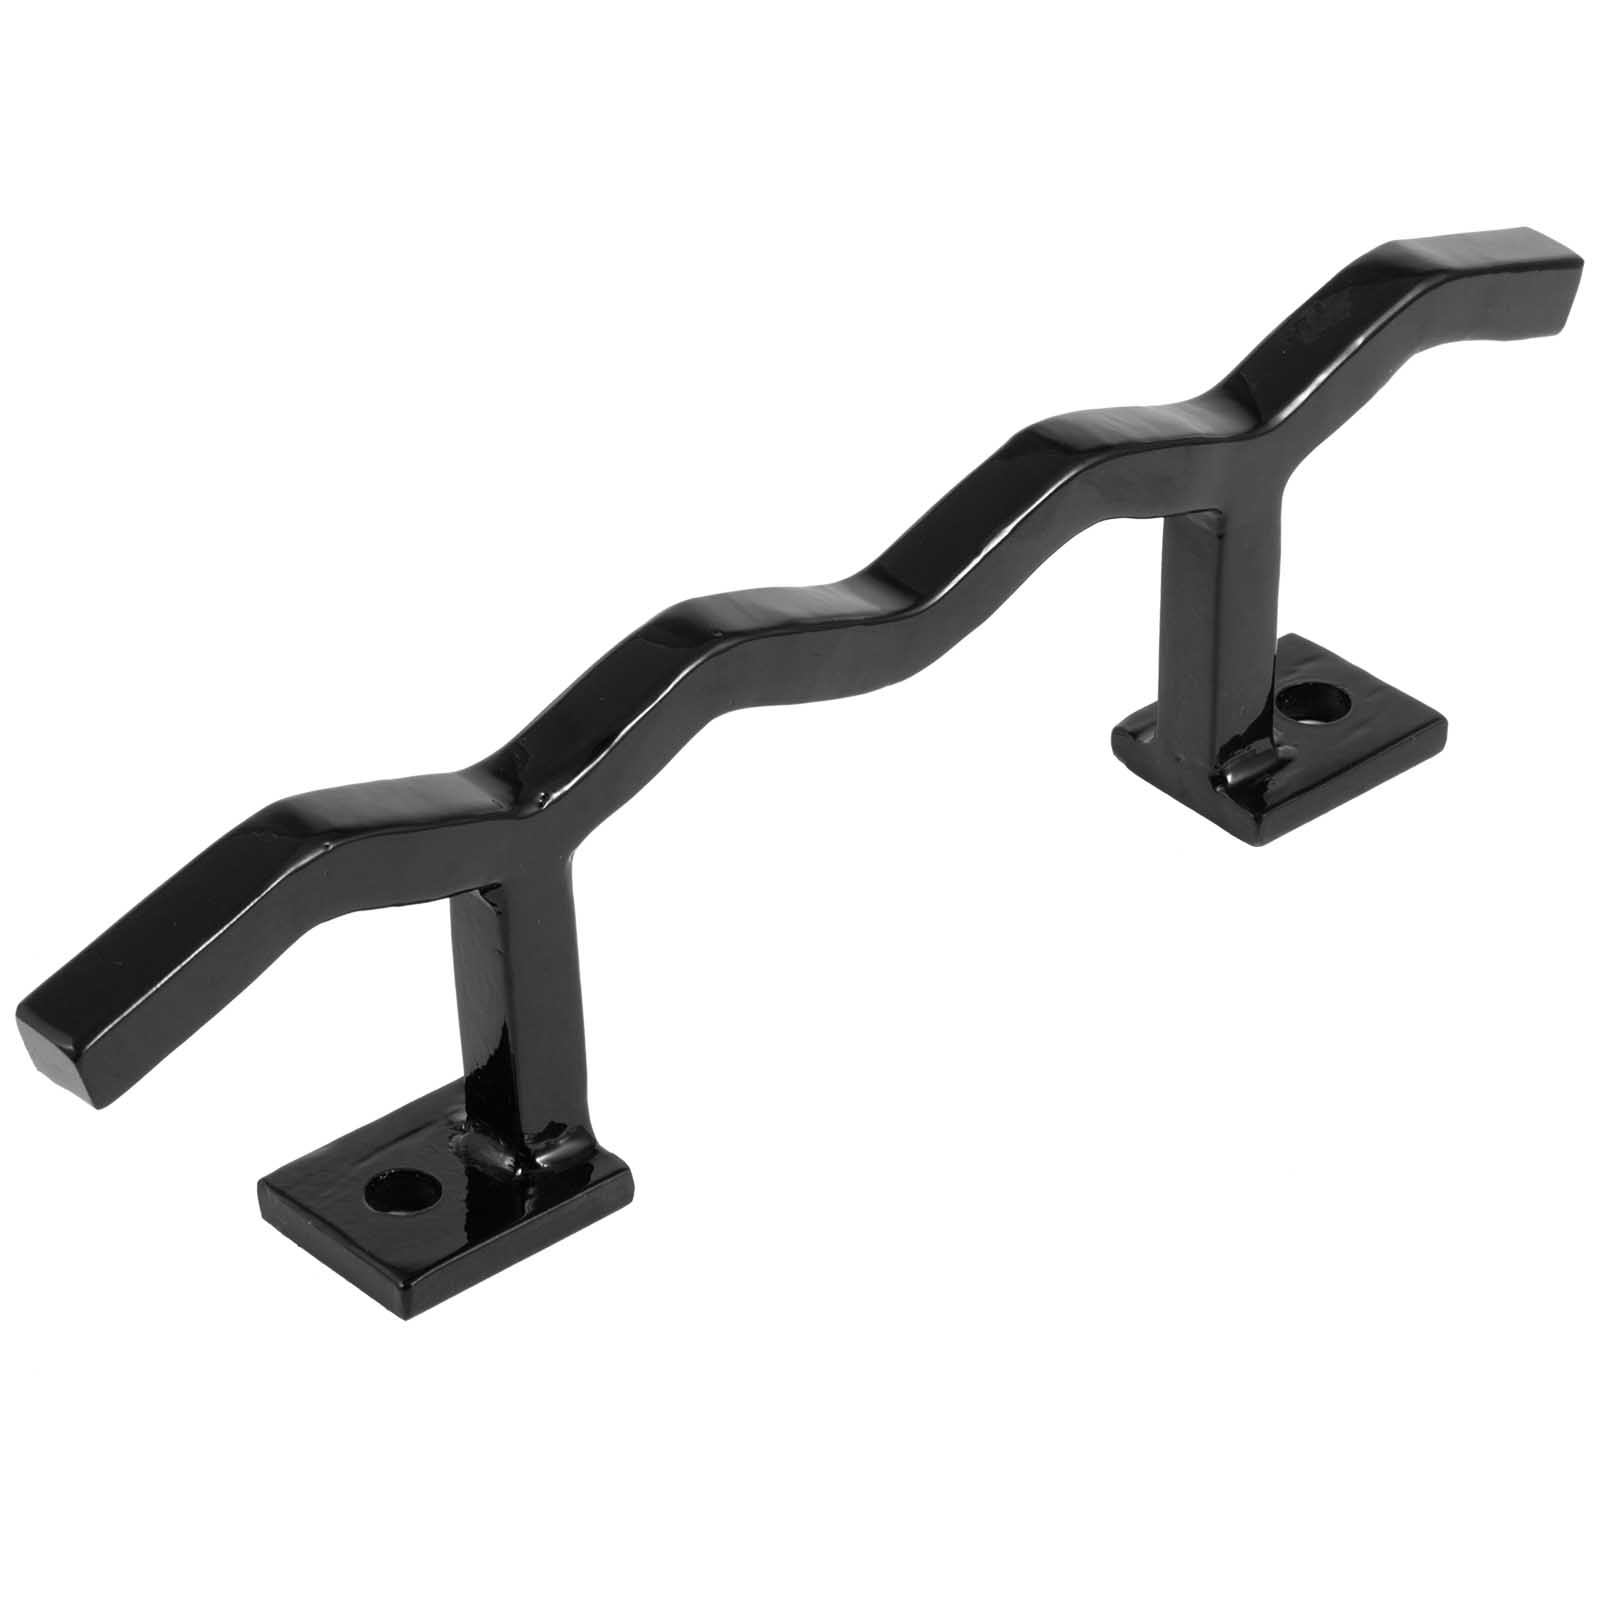 Handrails for Outdoor Step Wrought Iron Handrail 20 ...